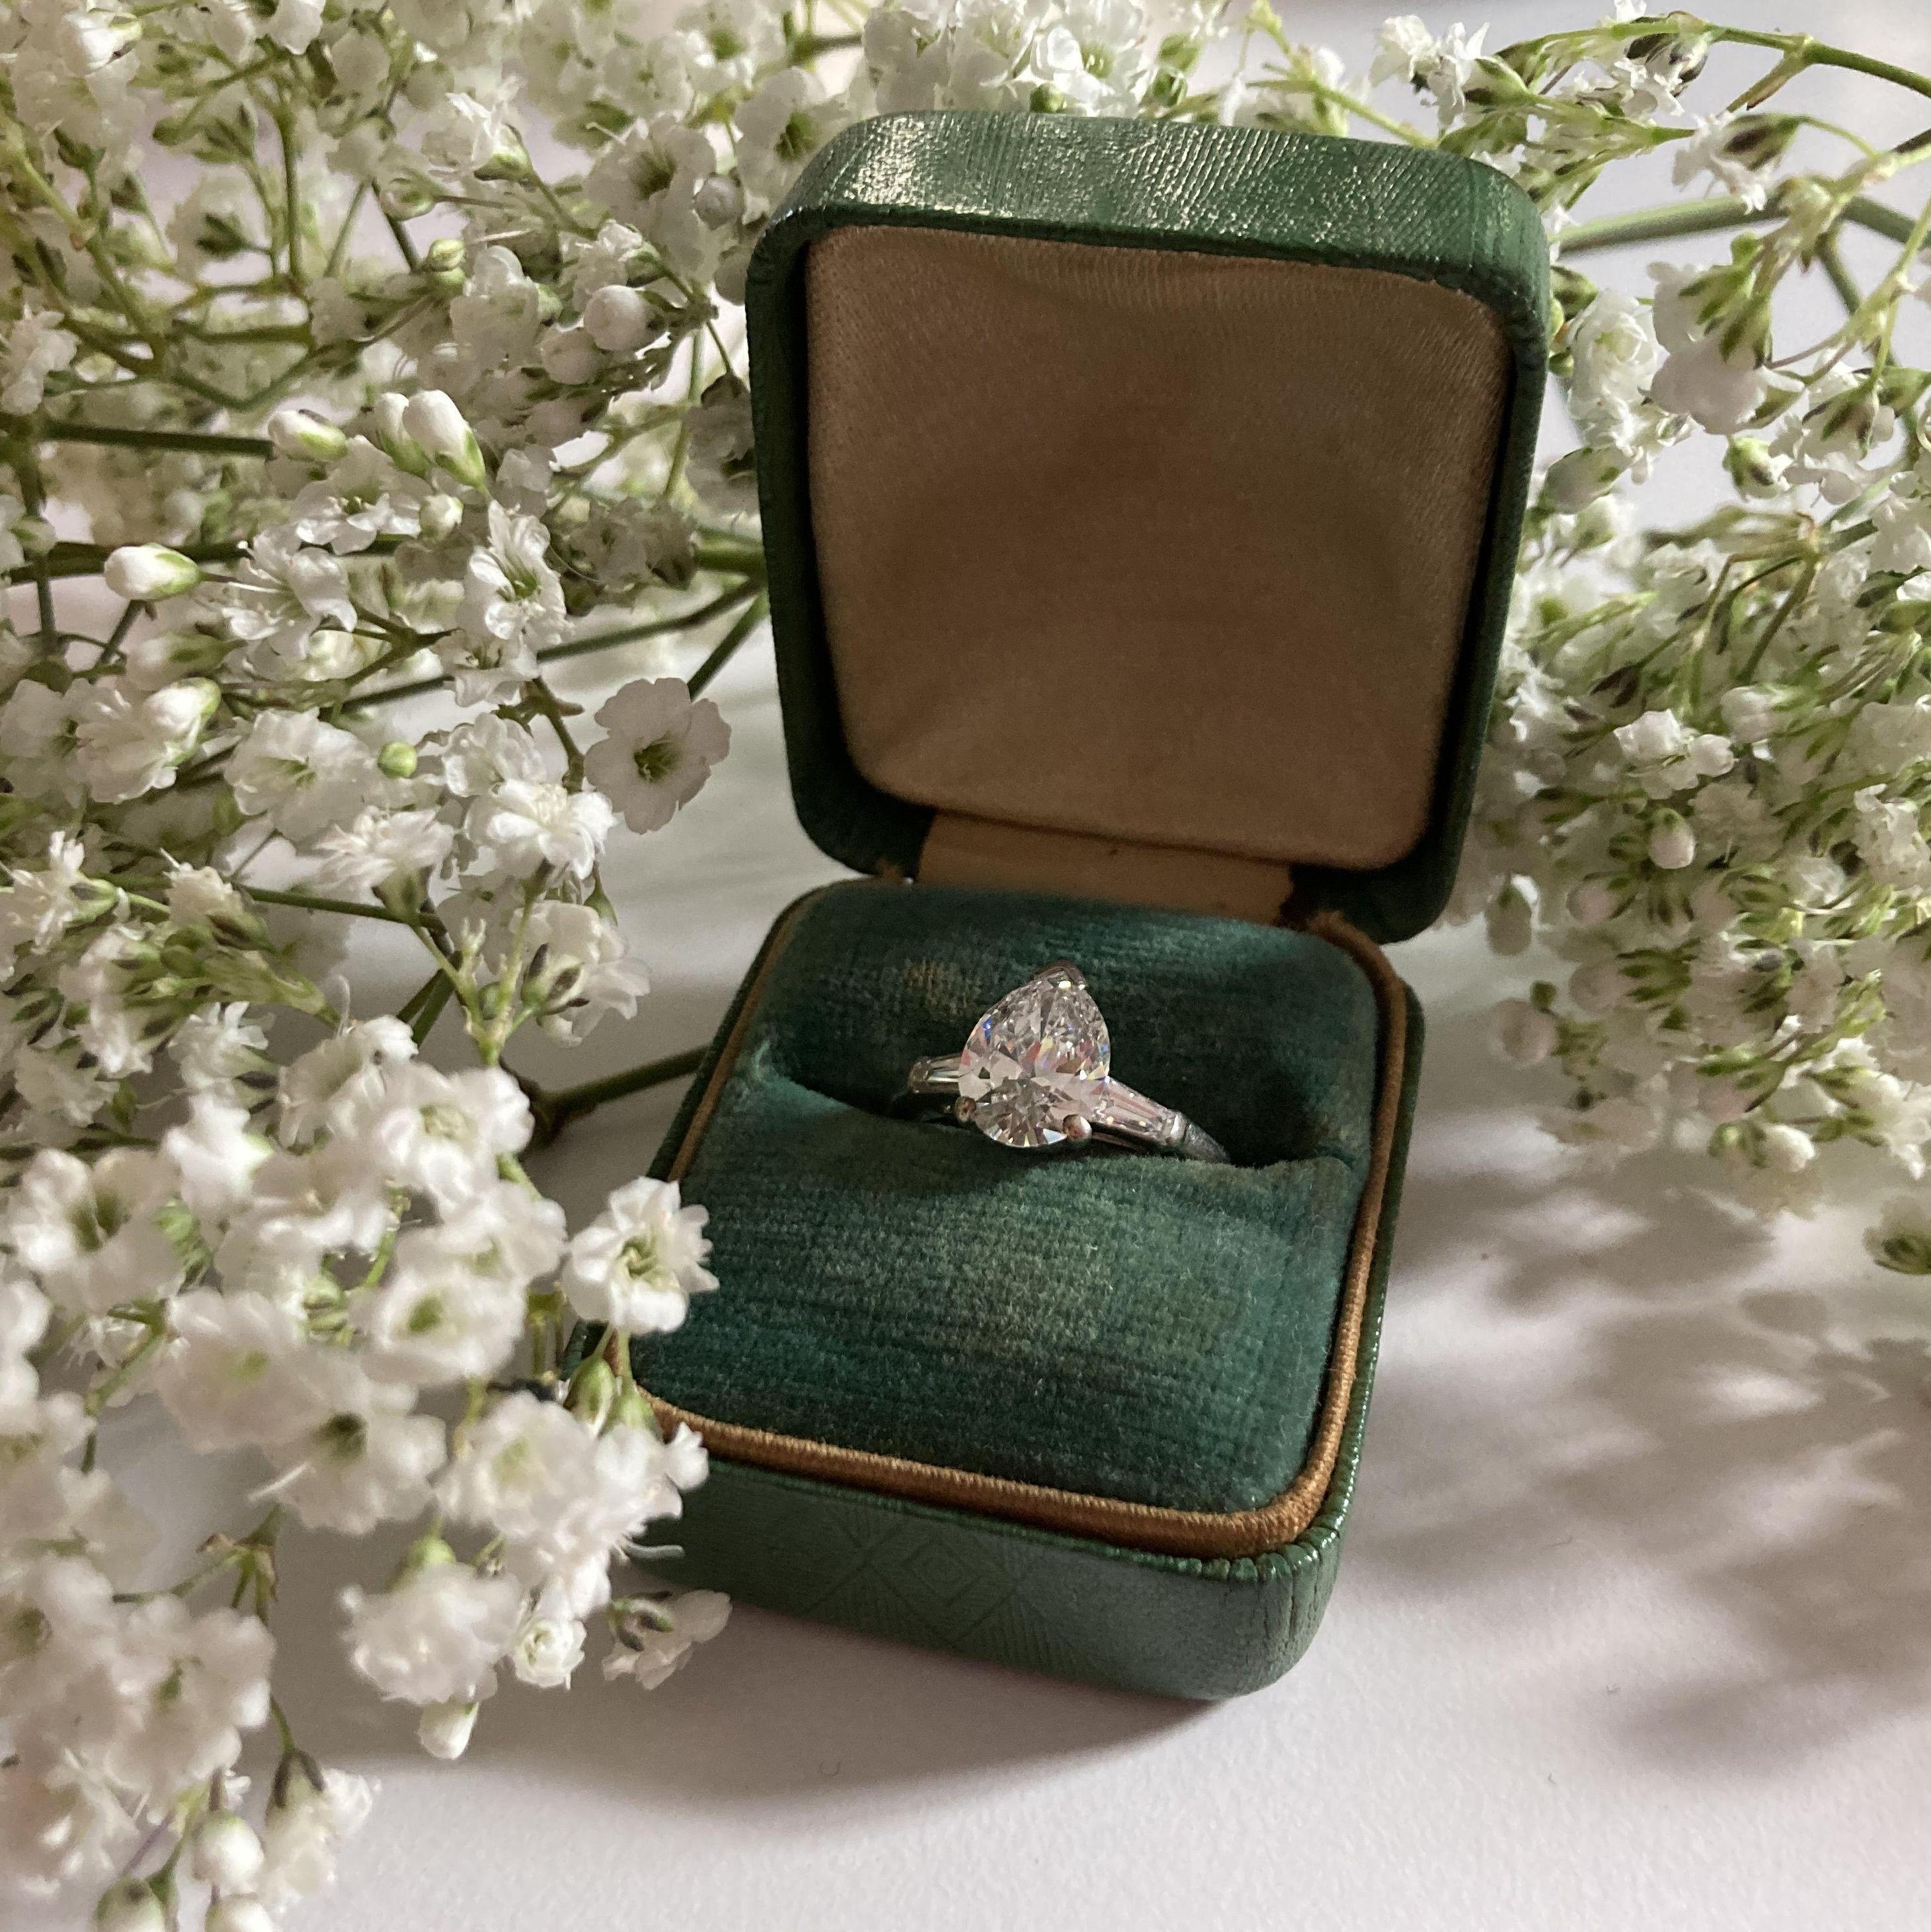 Kevin proposed with the ring that originally belonged to his grandmother, Claire. Later it was sized and customized to fit Leah.